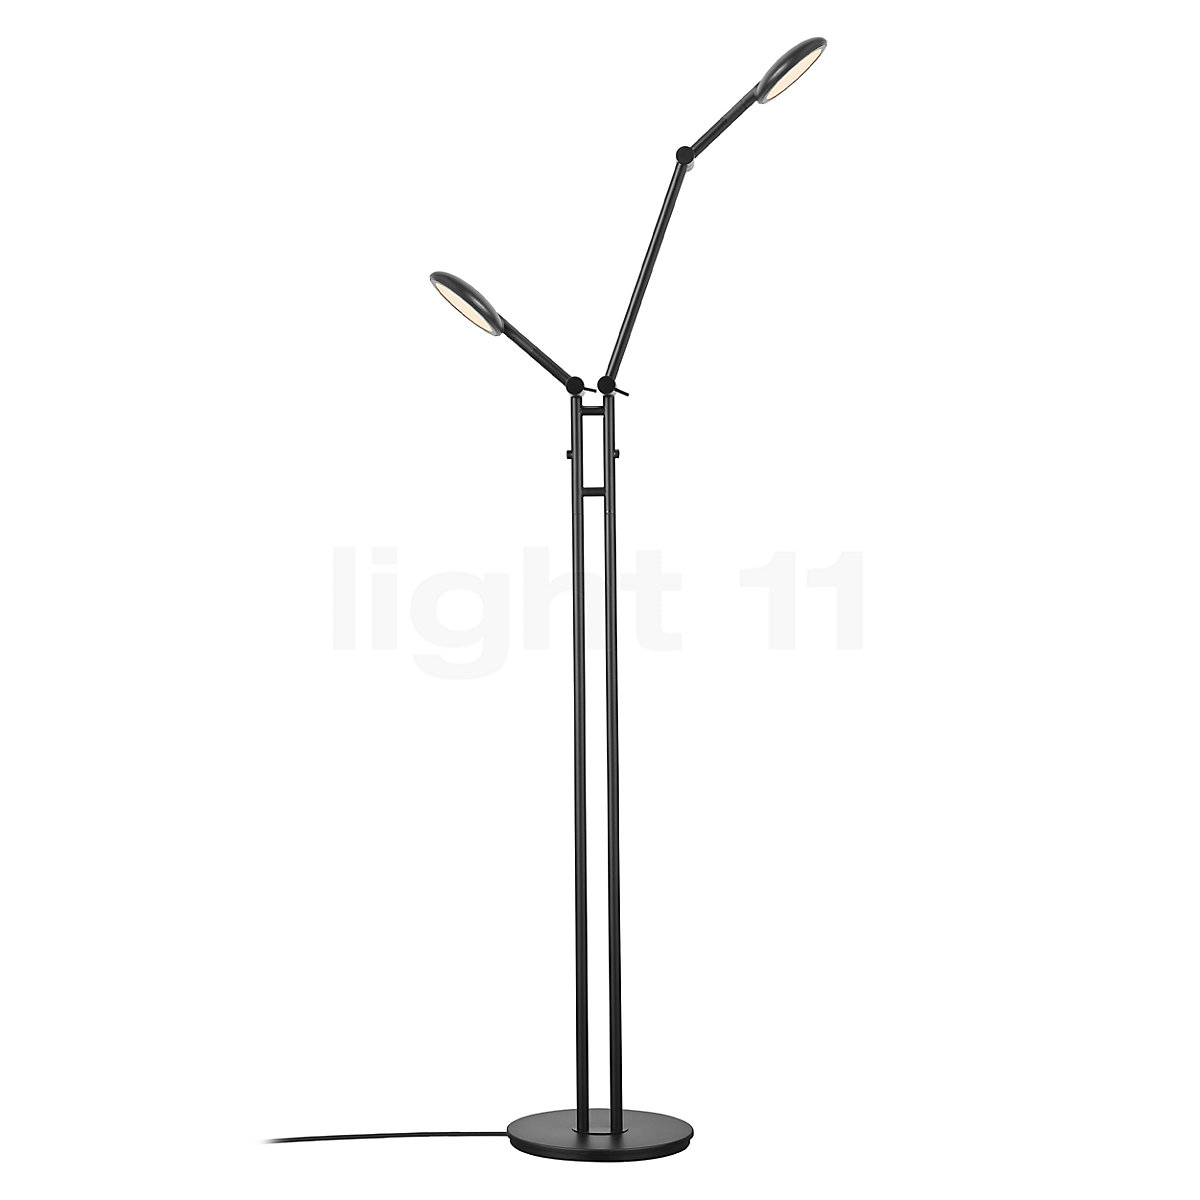 Bend Lamp at Floor Double Buy LED Nordlux